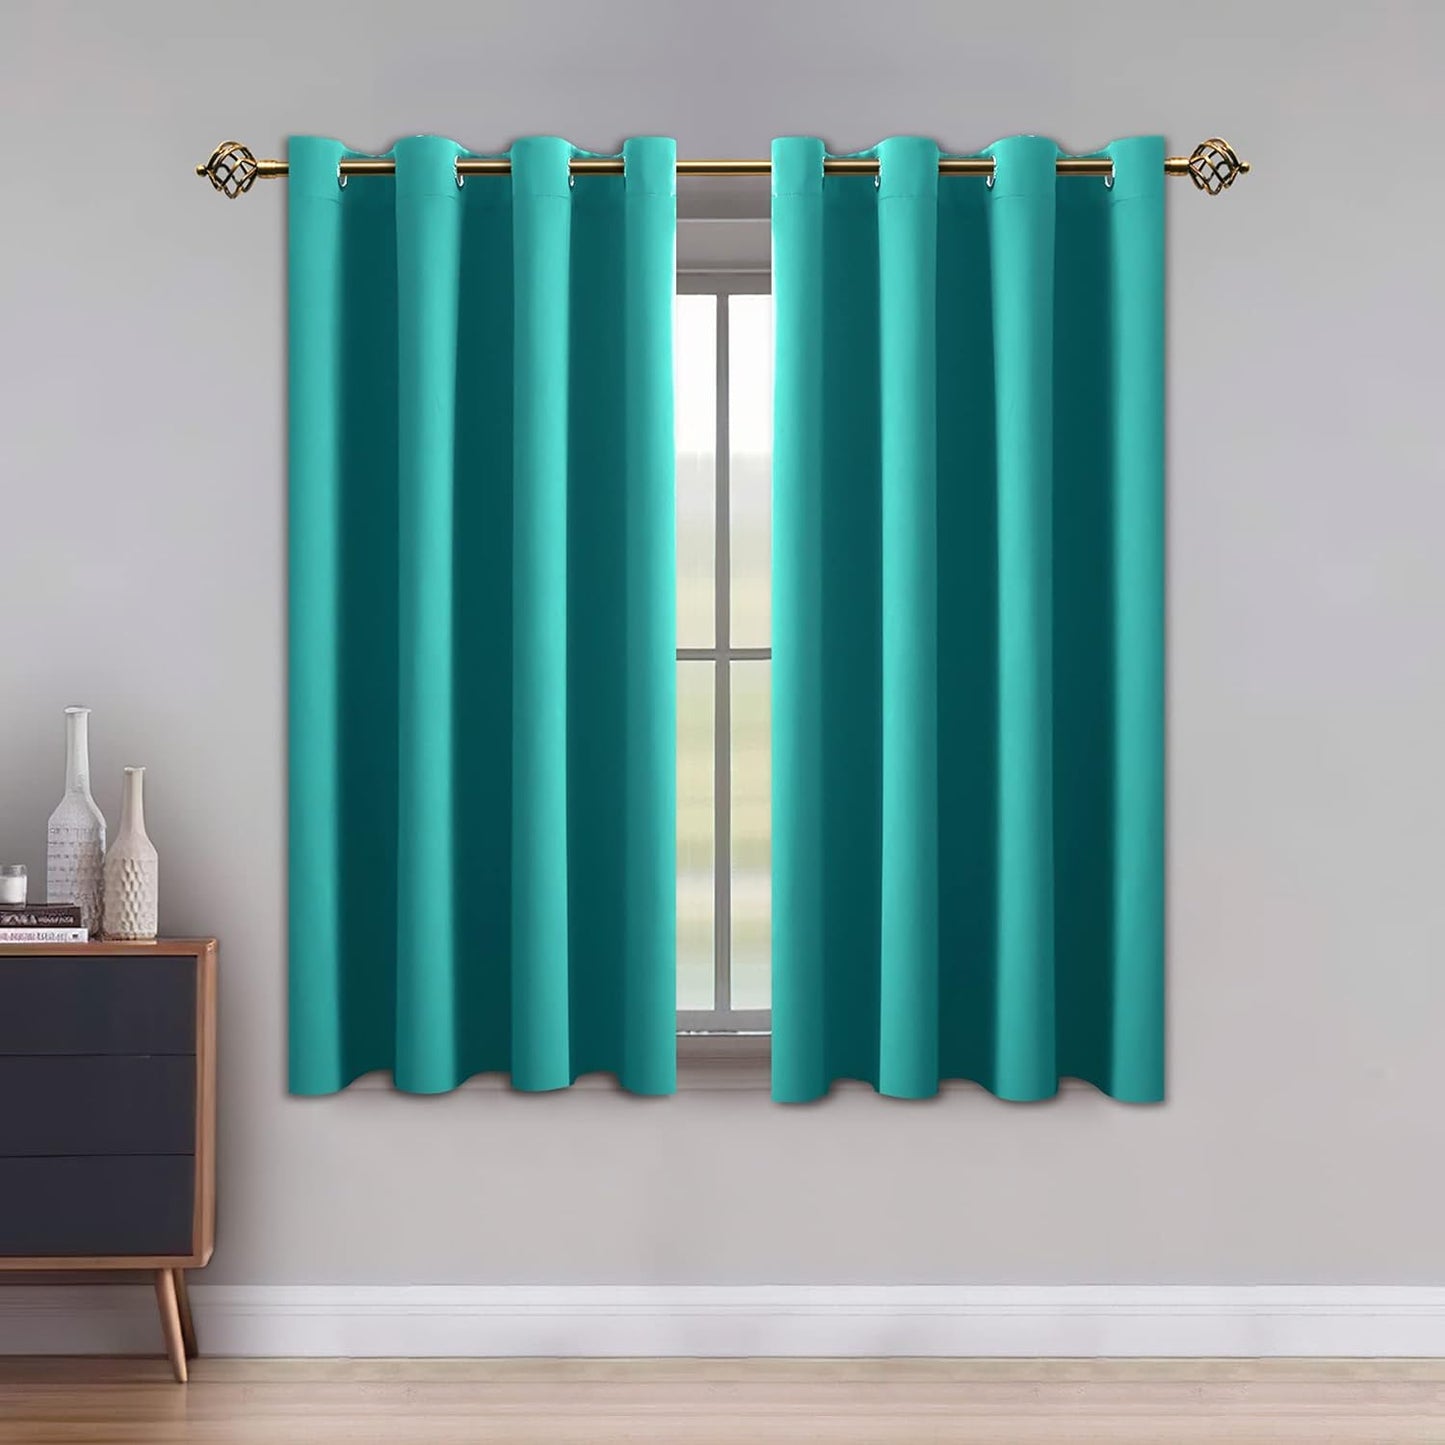 LUSHLEAF Blackout Curtains for Bedroom, Solid Thermal Insulated with Grommet Noise Reduction Window Drapes, Room Darkening Curtains for Living Room, 2 Panels, 52 X 63 Inch Grey  SHEEROOM Turquoise 42 X 63 Inch 